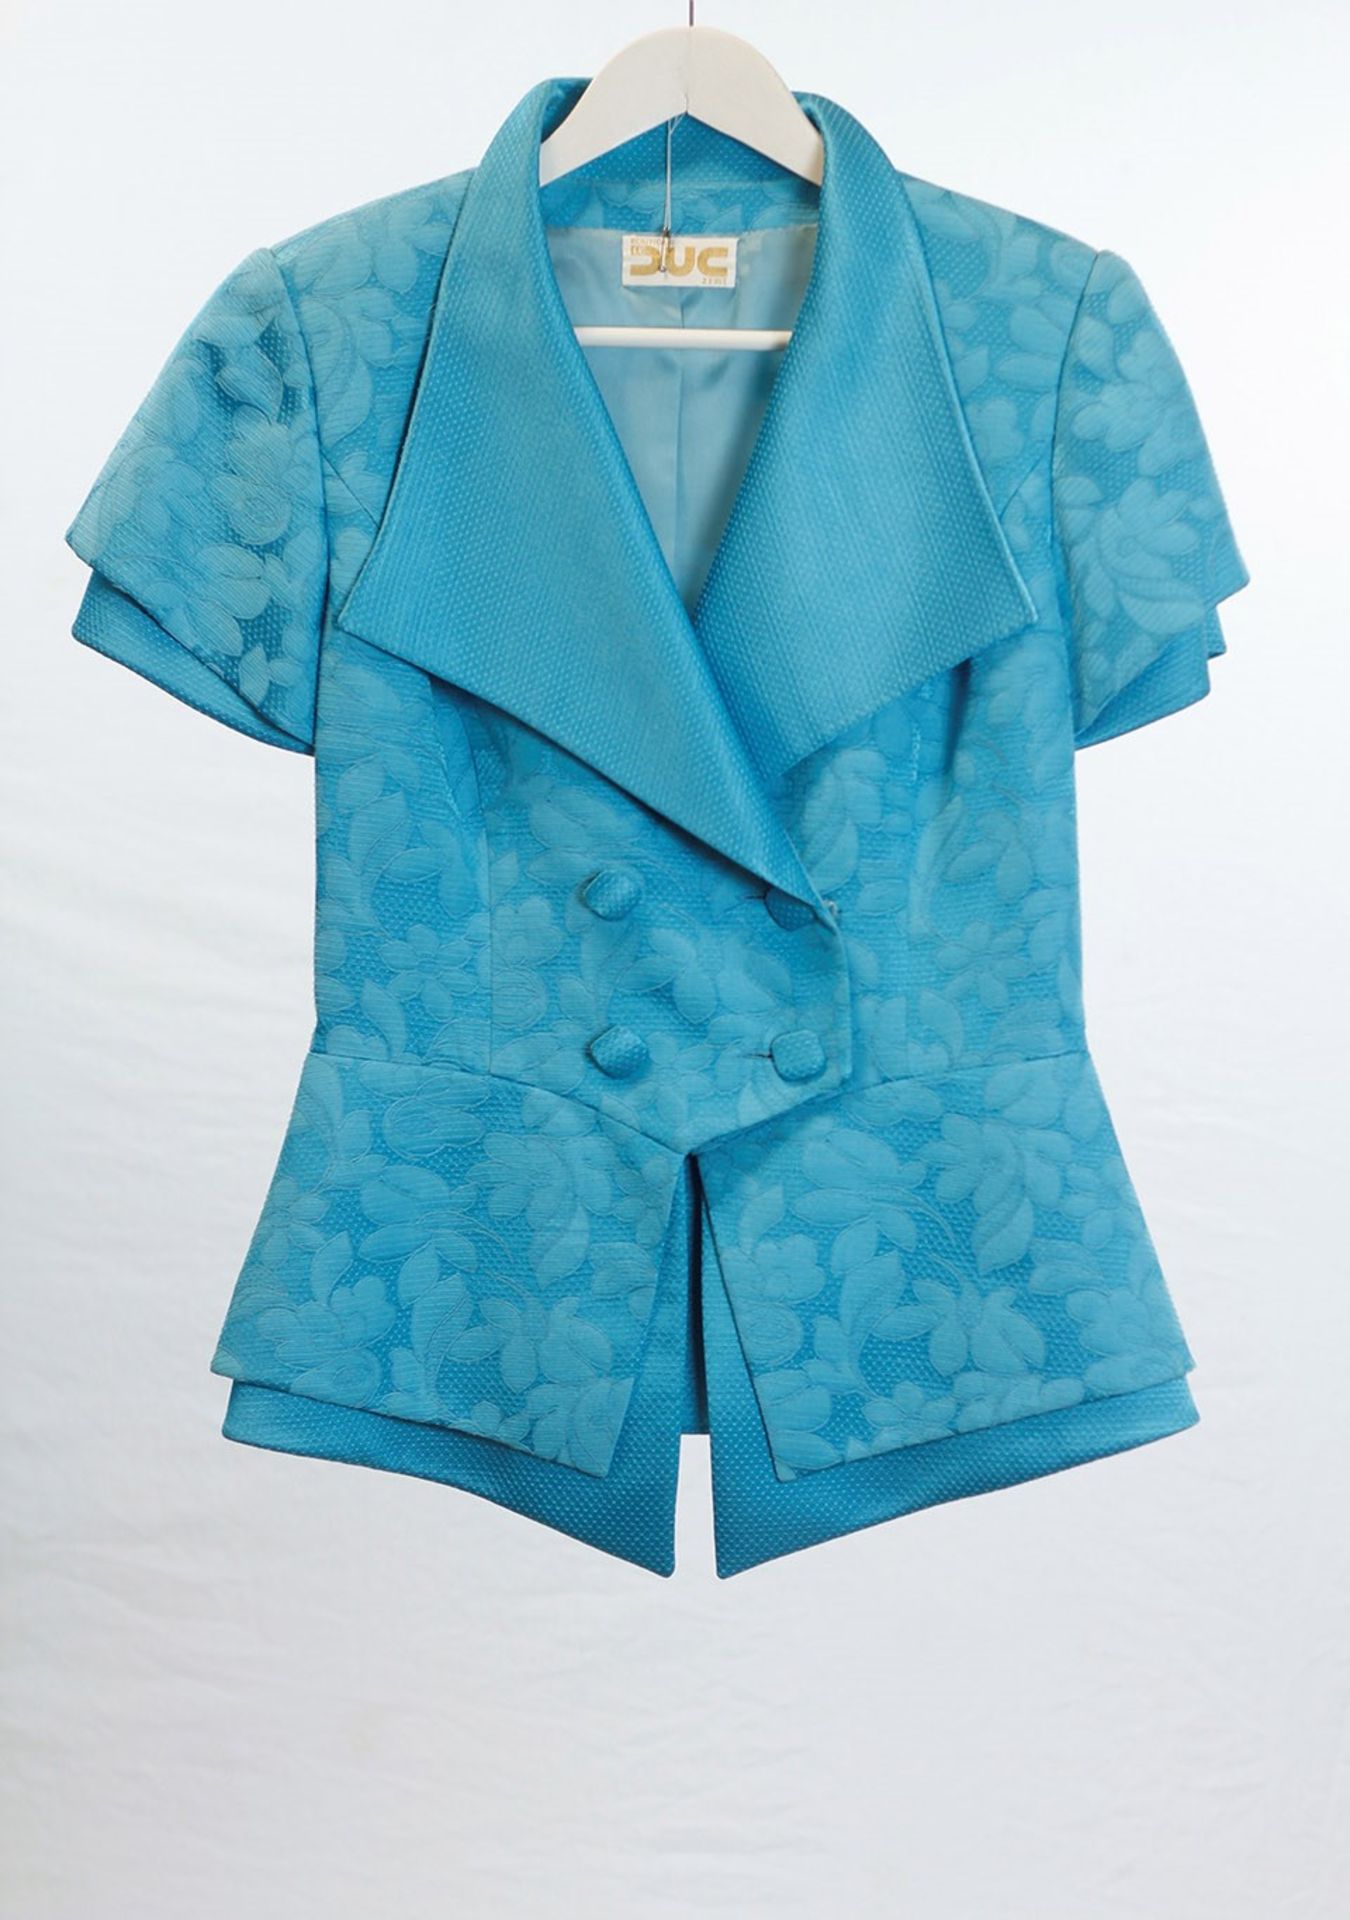 1 x Boutique Le Duc Blue Skirt Suit - Size: 12 - Material: 100% Cotton - From a High End Clothing